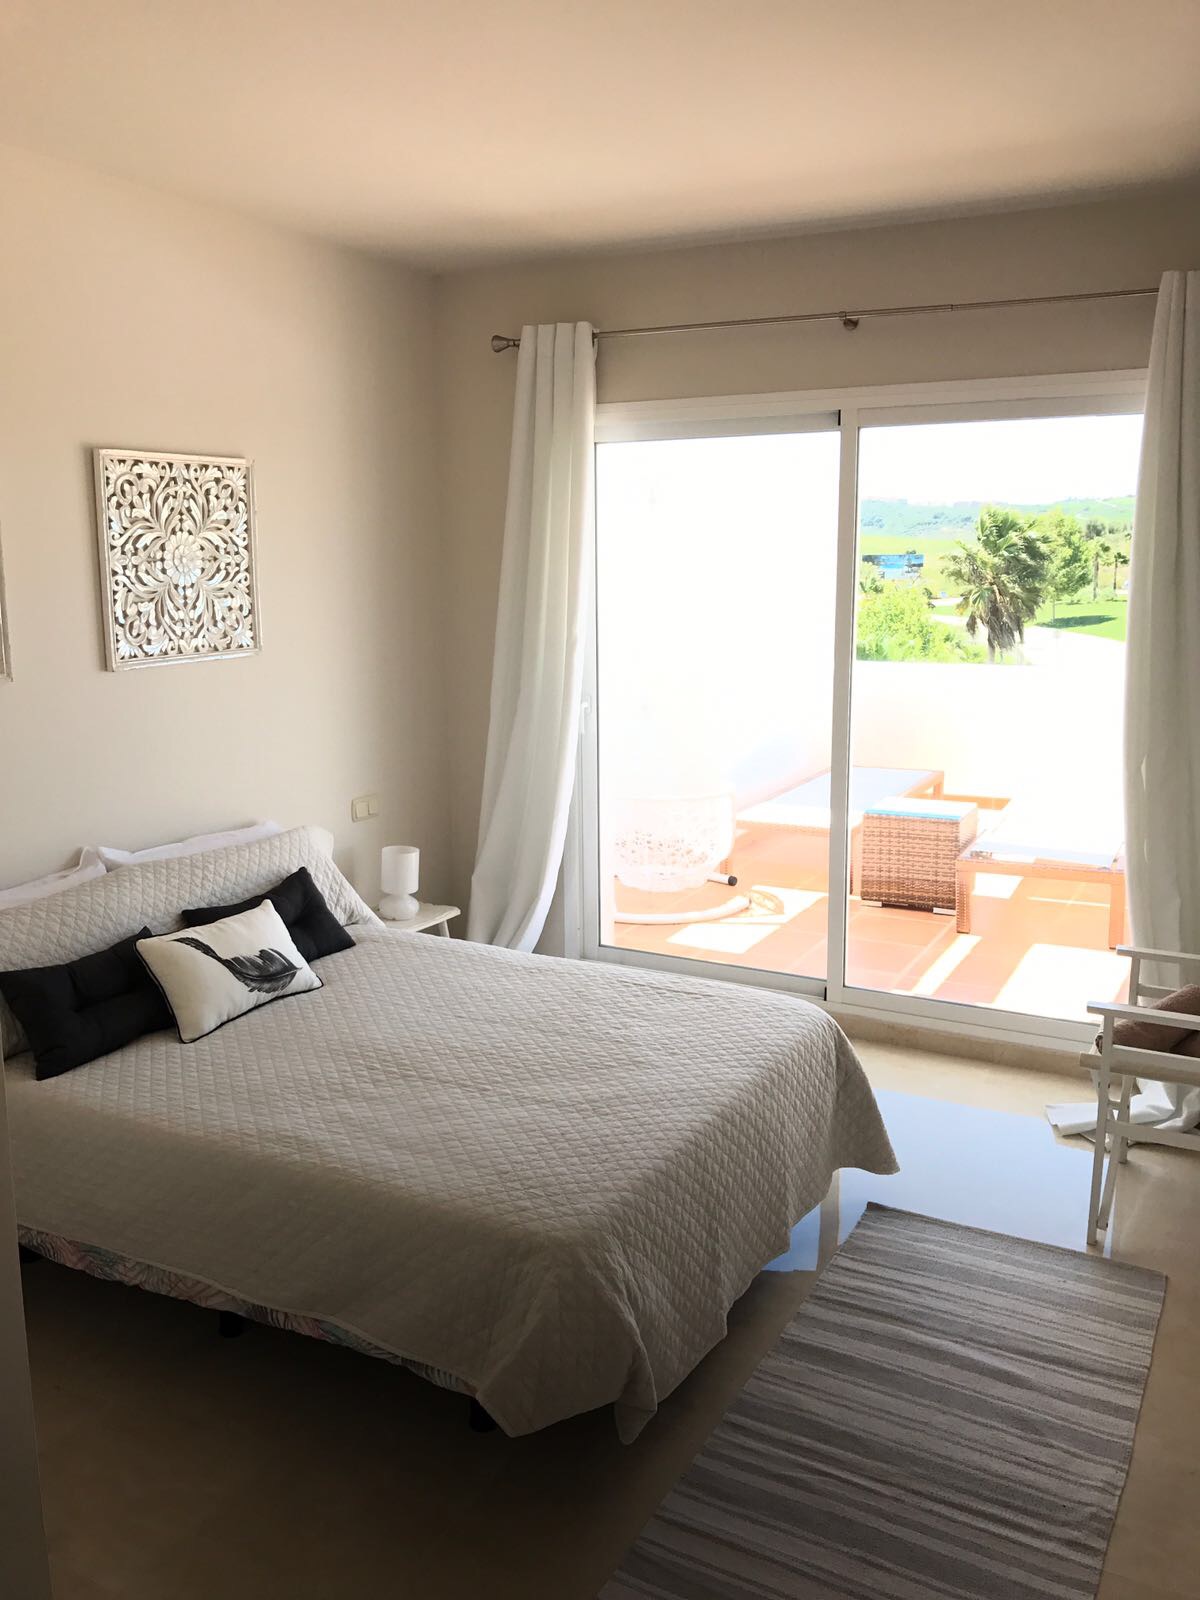 Image shows the main bedroom of this stylish penthouse in Alcazaba Lagoon with a large double bed and access to the terrace